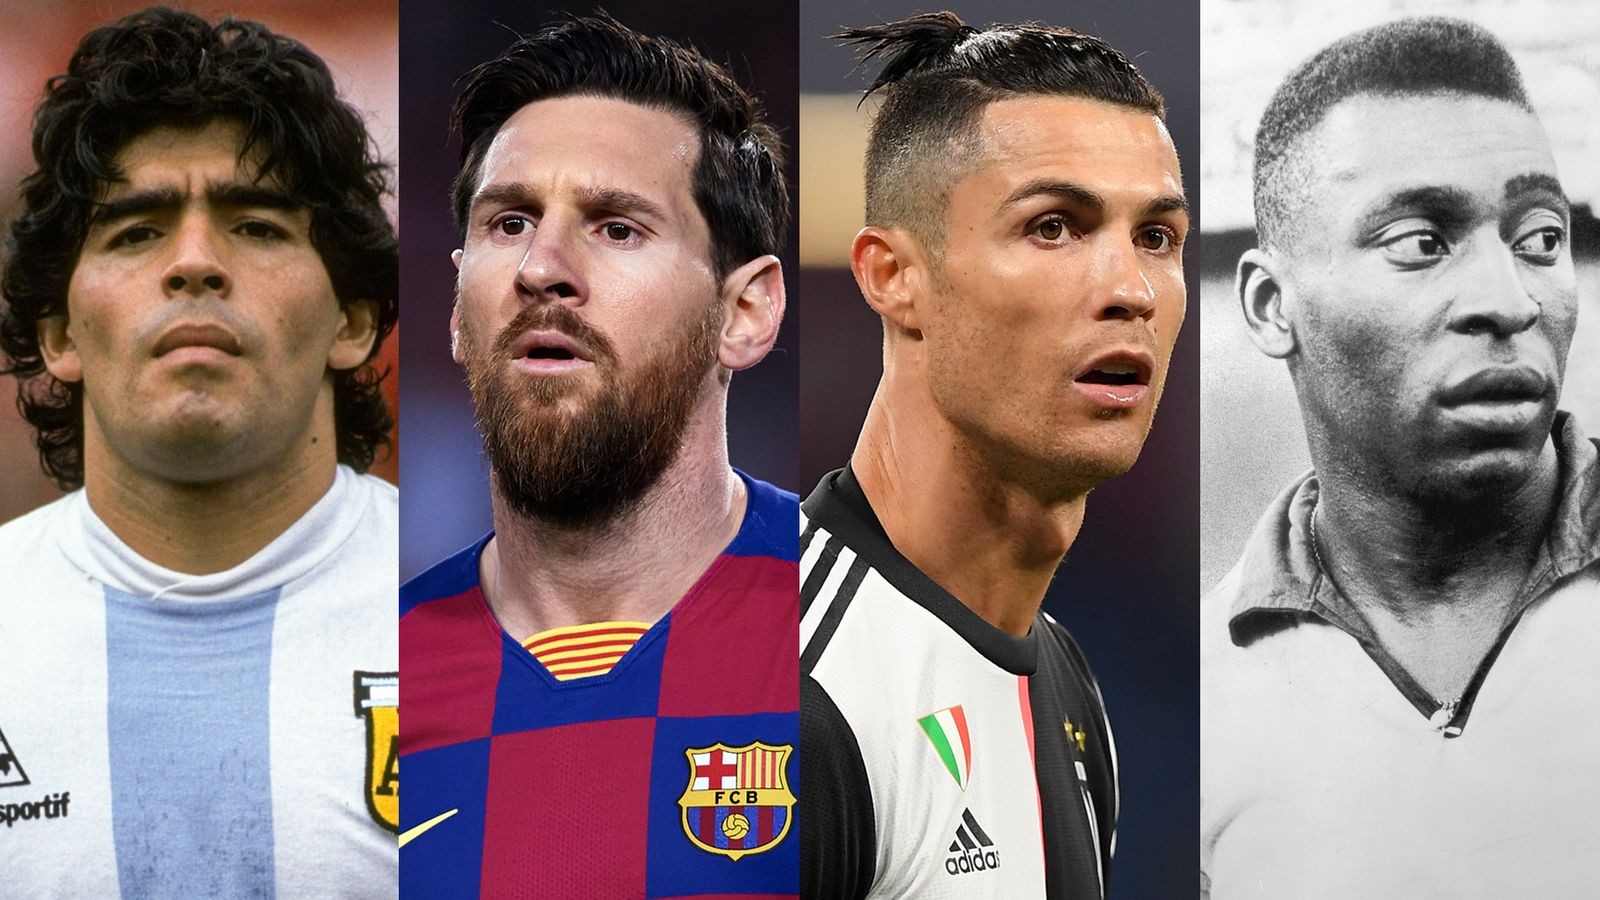 RANKED: the 10 Best Soccer Players in the World Right Now